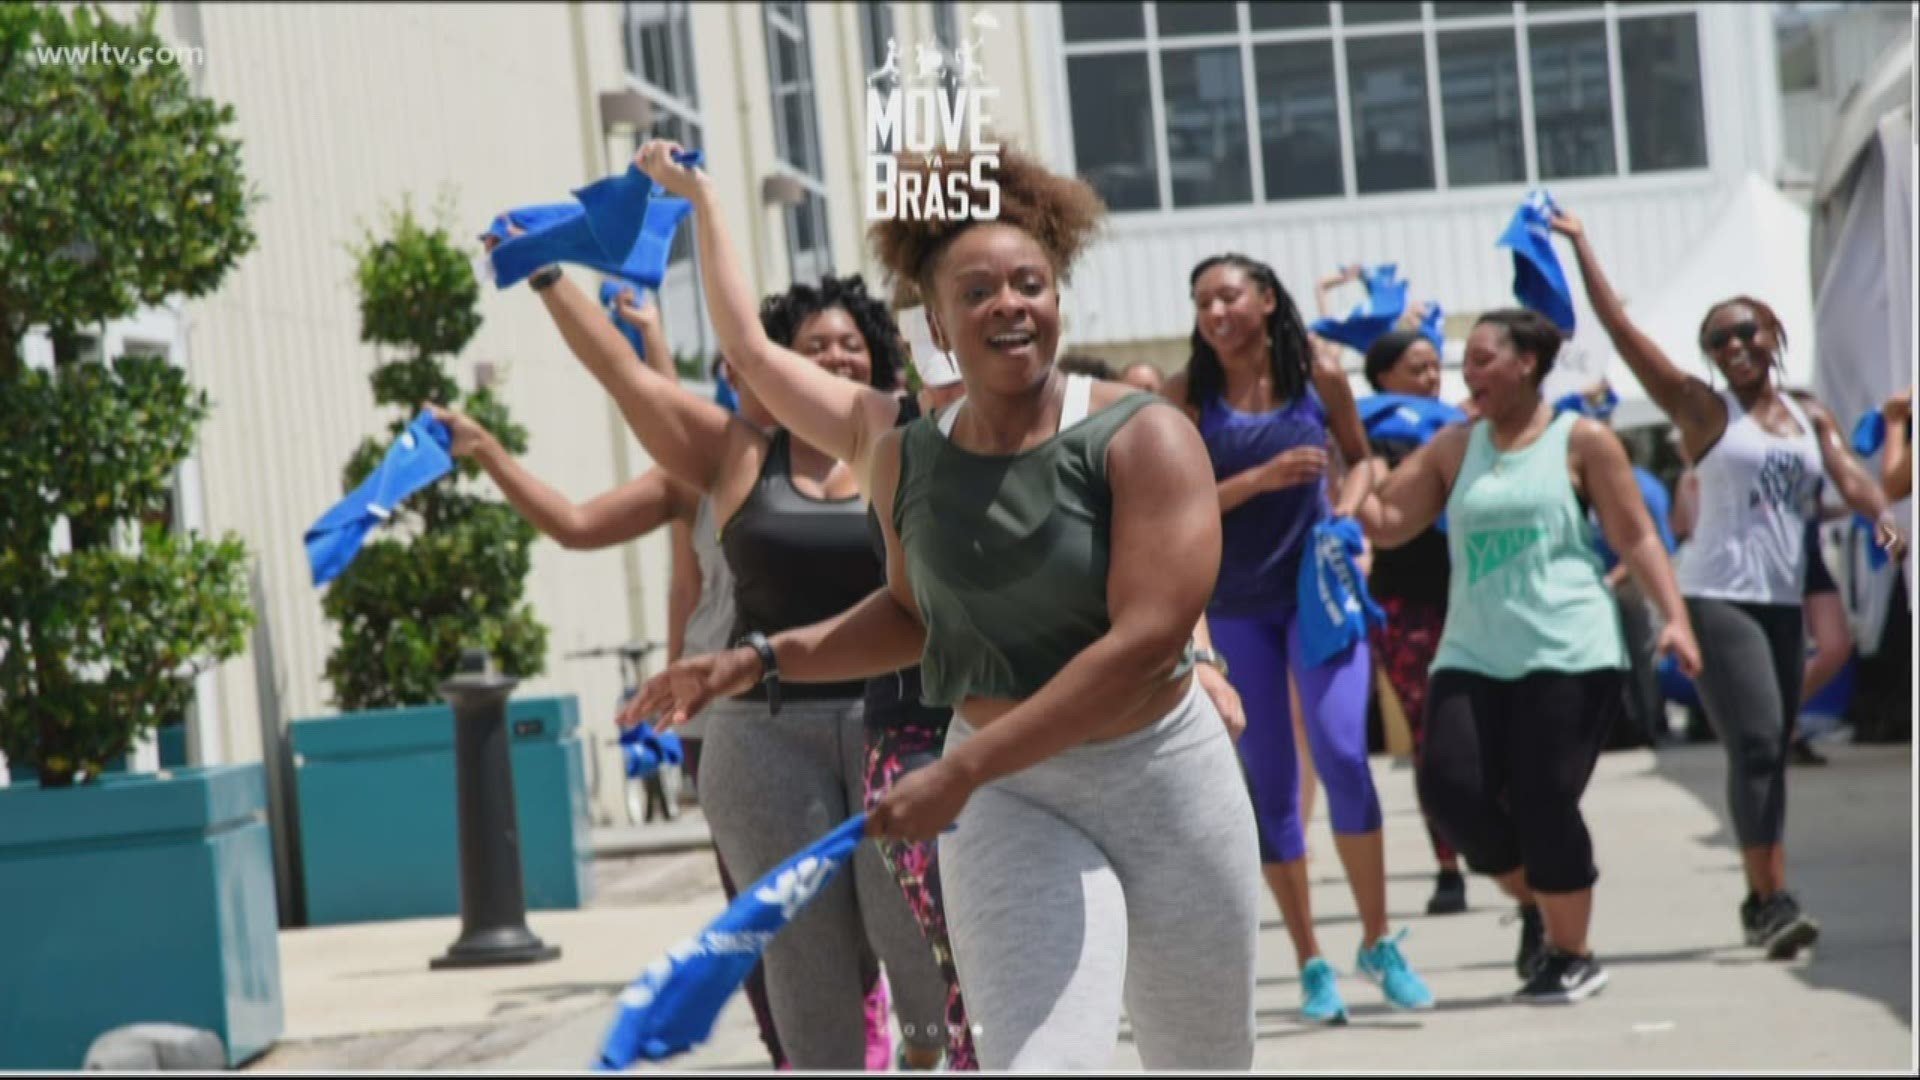 Jazz Singer Robin Barnes with the help of Shanda Domango is helping the public 'Move Ya Brass' in a free fitness event going all the to June.